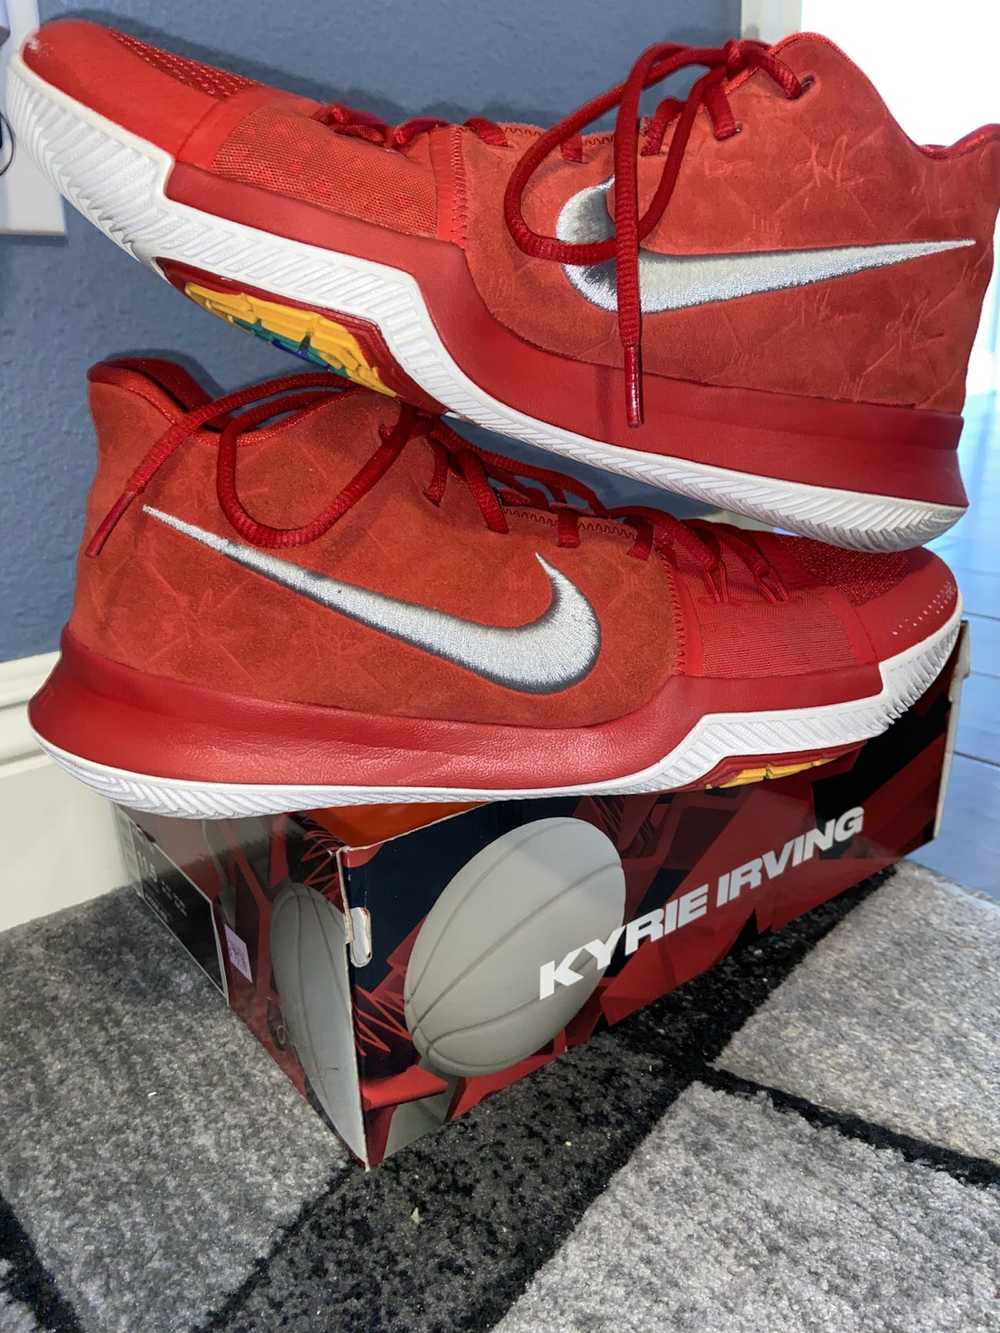 Nike Kyrie 3 Red Suede - image 1